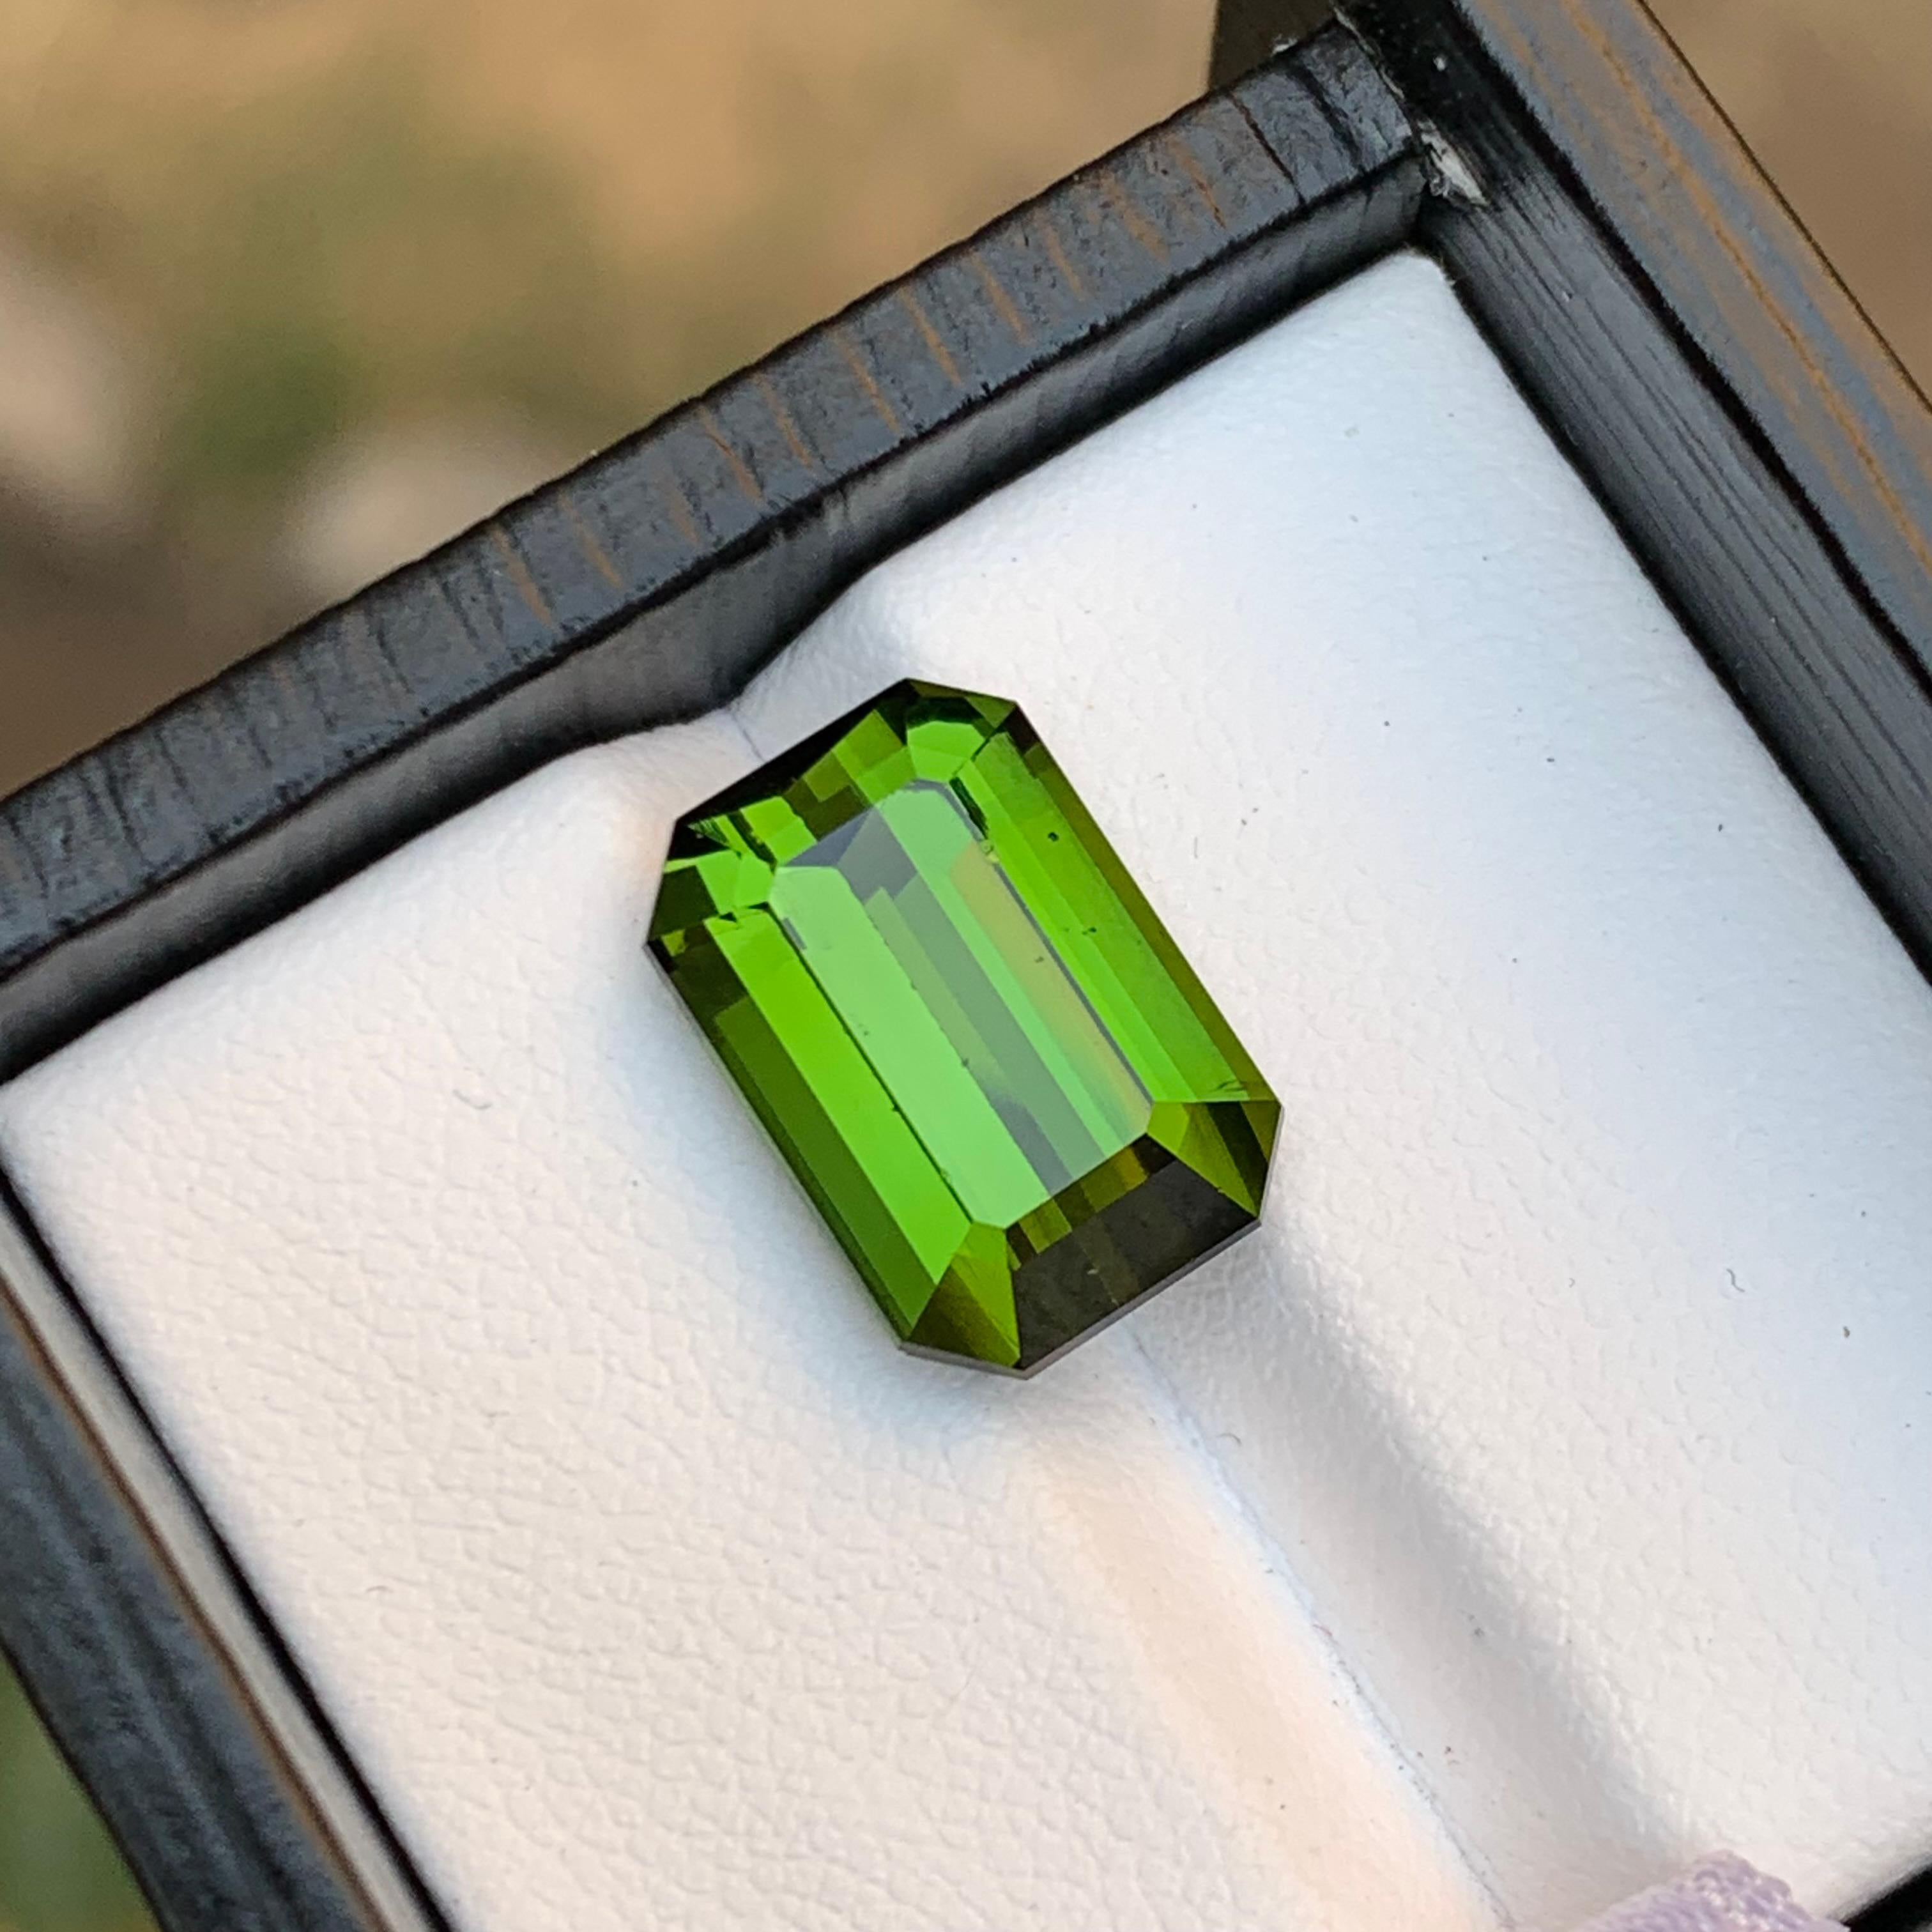 Elevate your jewelry creations with our stunning 7.75-Carats natural Tourmaline loose gemstone. Sourced from the Tourmaline mines of Afghanistan, this exceptional piece is meticulously cut and polished in an elegant emerald cut design. Revel in the